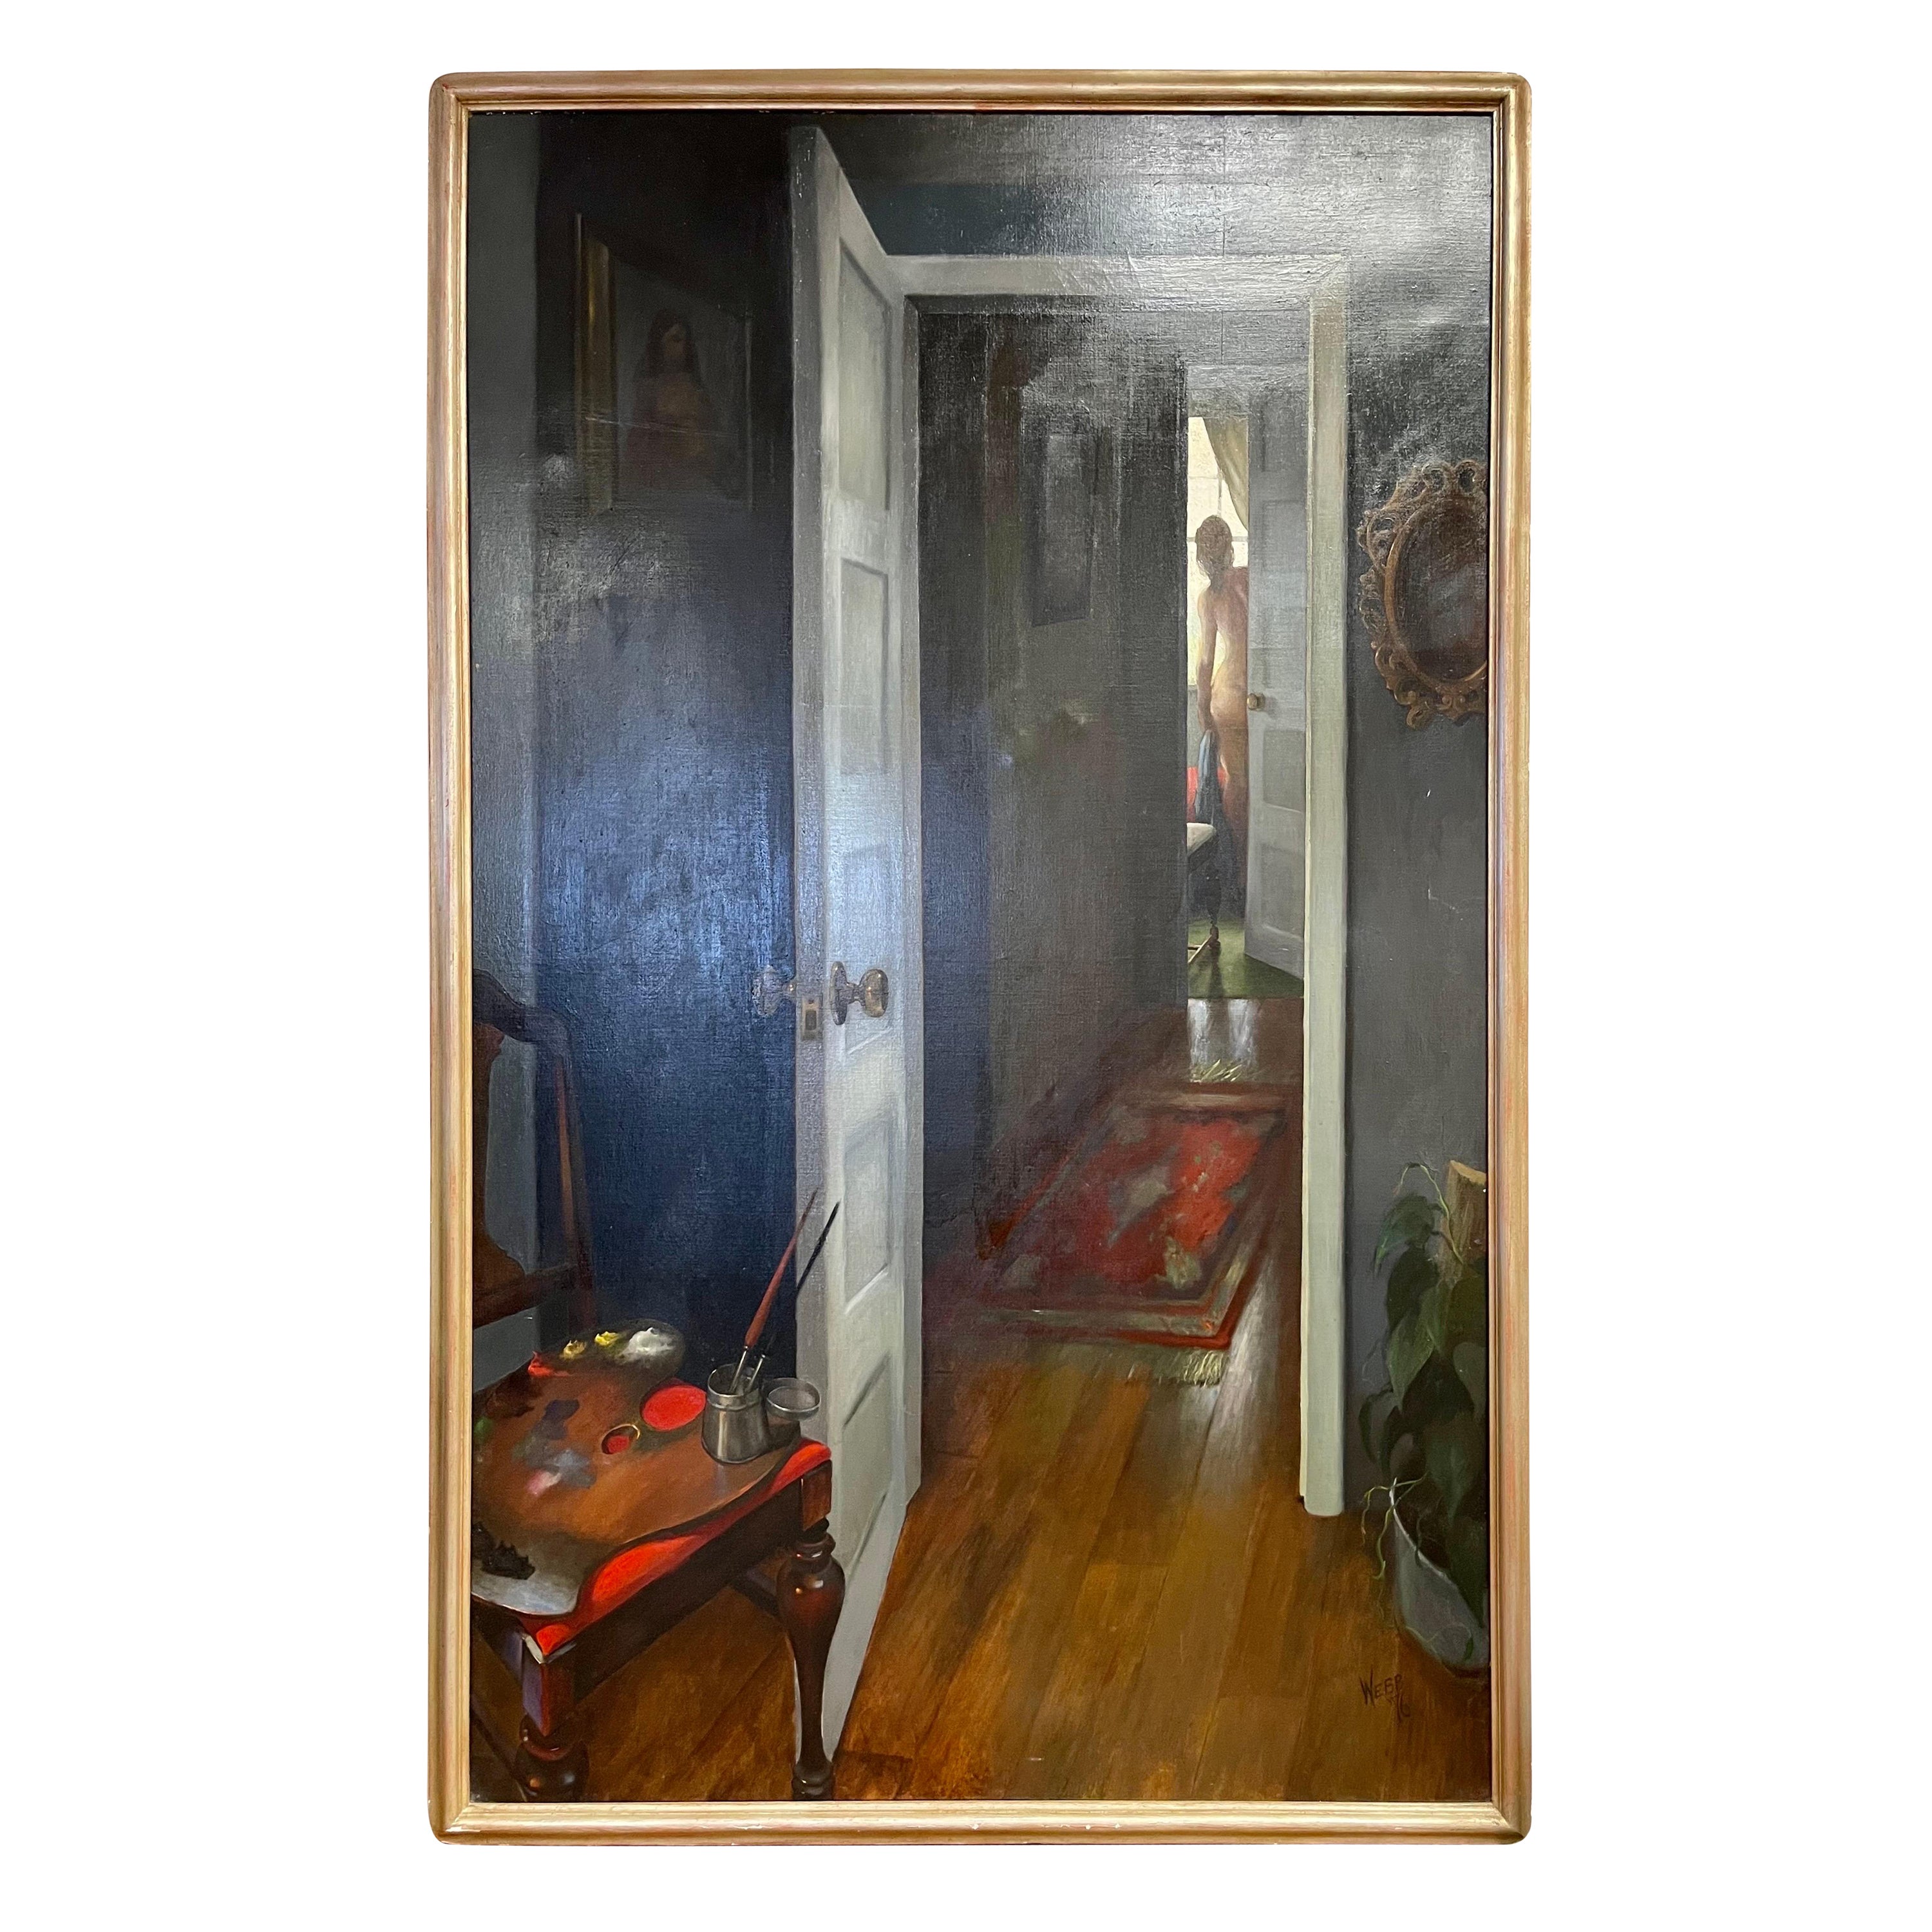 Original Signed Jeffrey R. Webb Painting Titled "Interior with Nude"